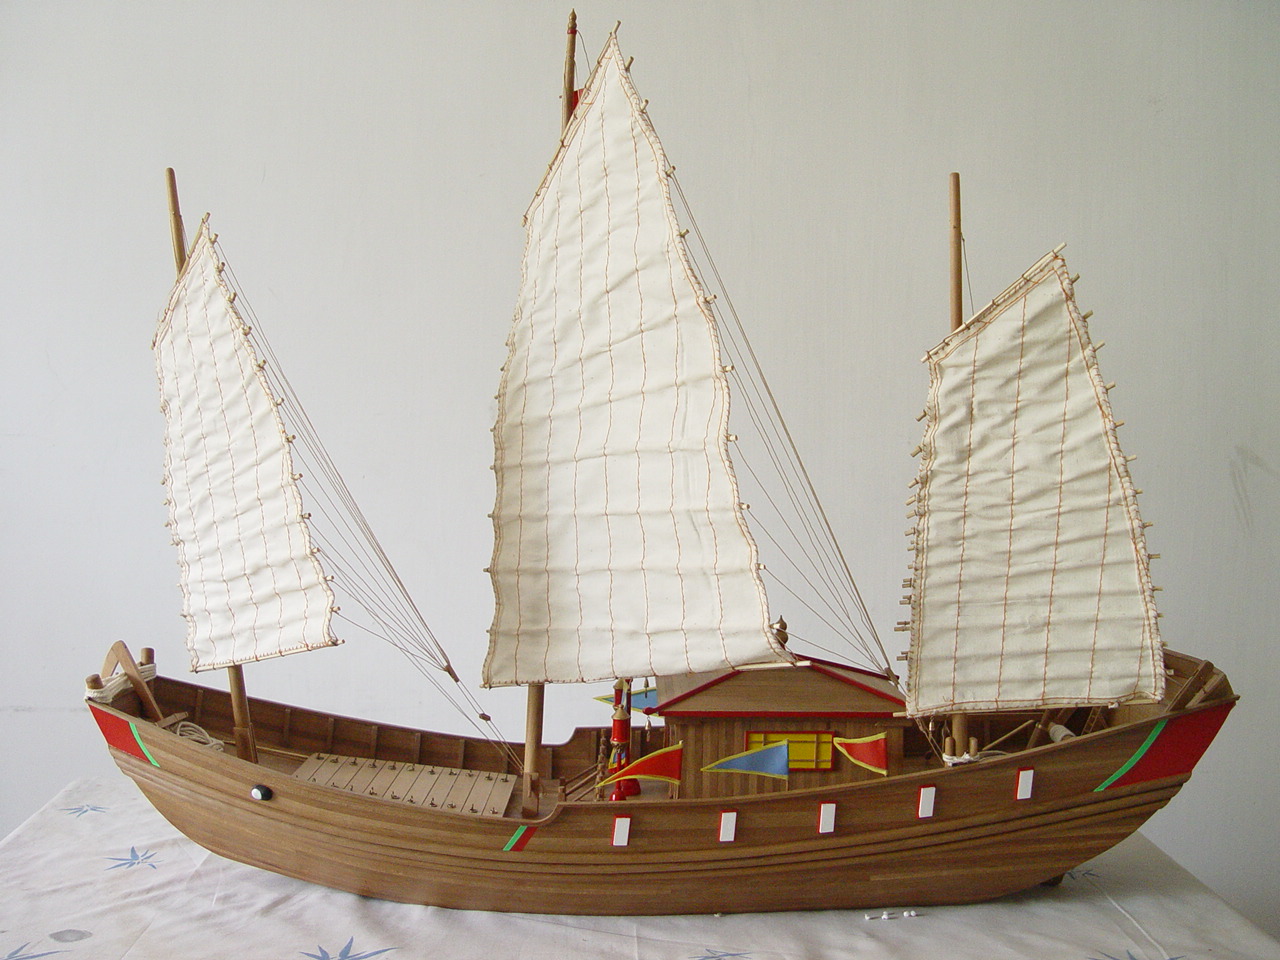 Ship model and all kinds of engineering machinery model making